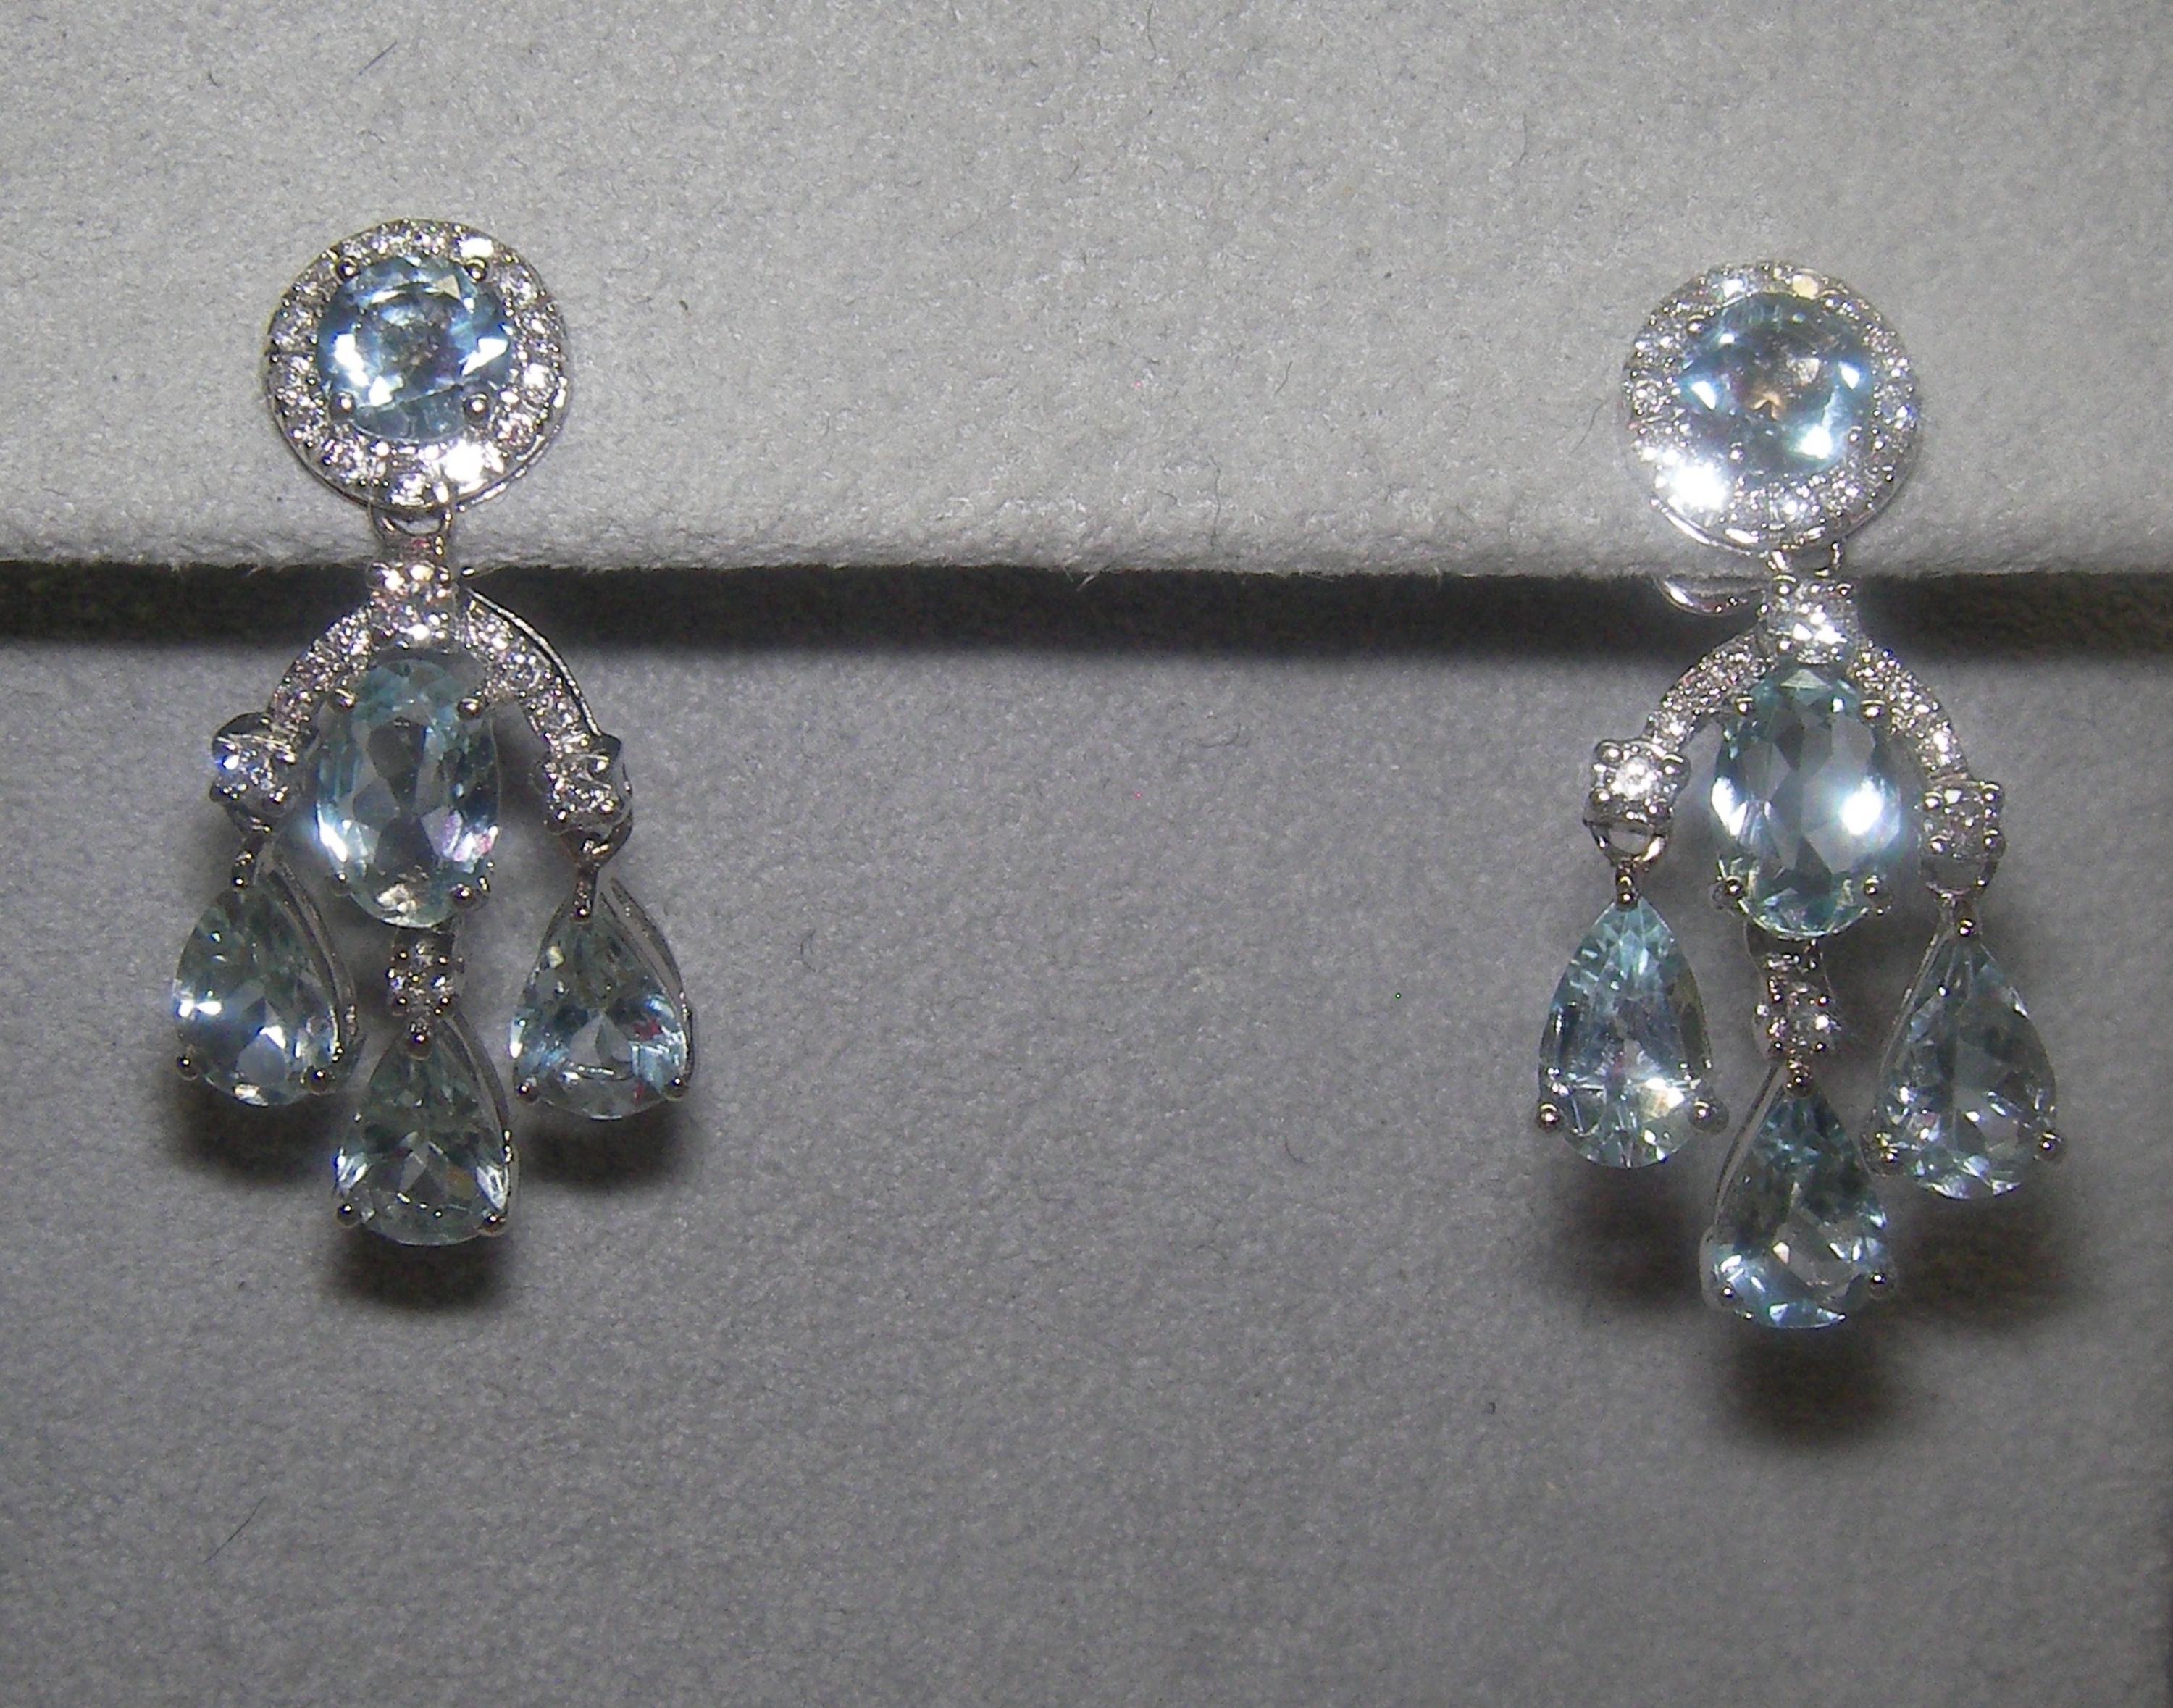  18 Karat White Gold Diamond, Aquamarine Dangle Earrings

48  Diamonds 0.33 Carat H SI
10 Aquamarine  3.29 Carat


Founded in 1974, Gianni Lazzaro is a family-owned jewelry company based out of Düsseldorf, Germany.
Although rooted in Germany, Gianni